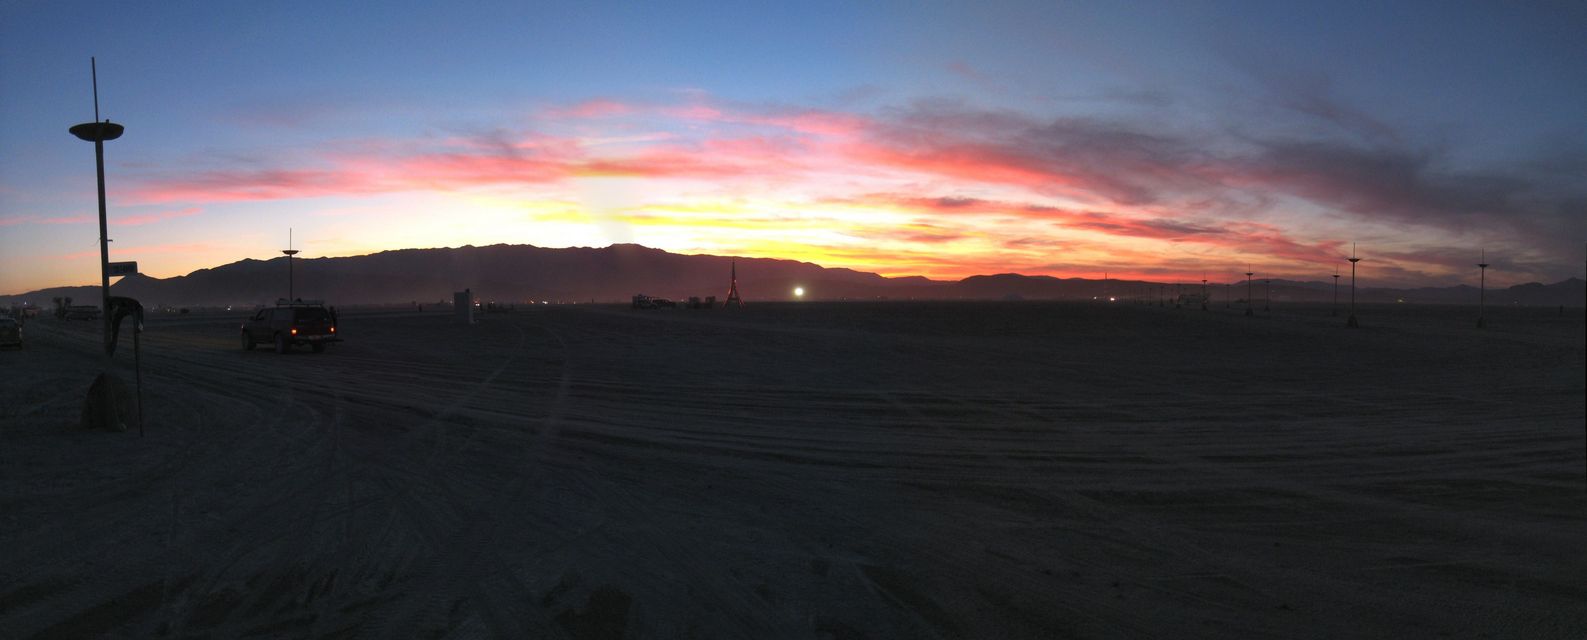 sunset_panorama.jpg: Sunset over the playa (photo by Lee)